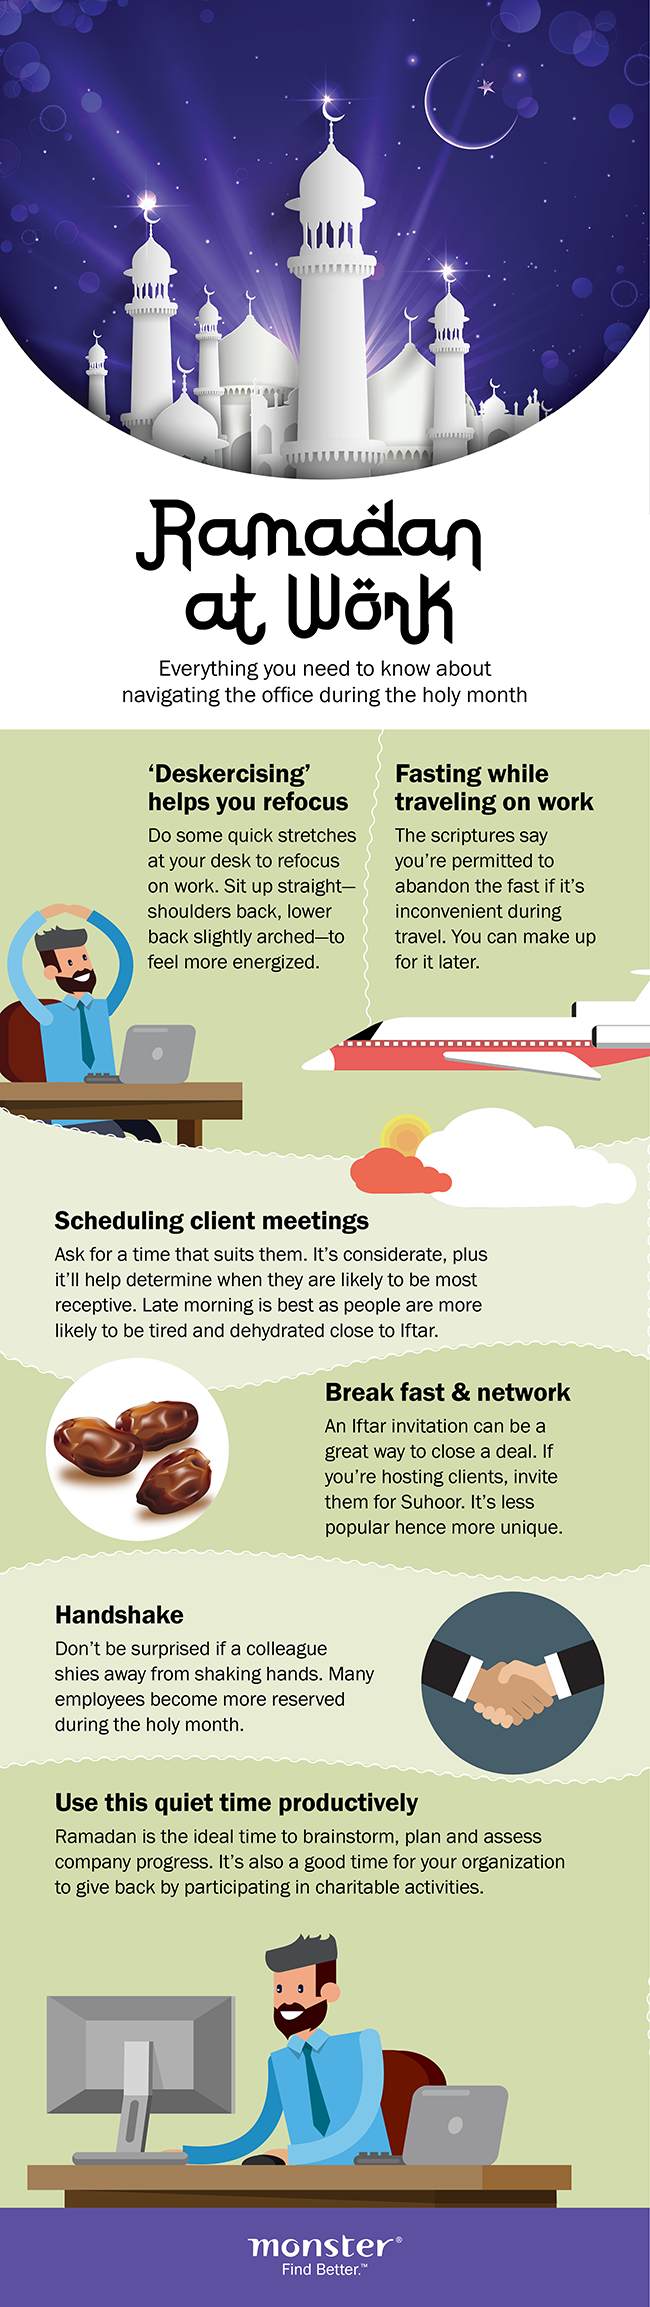 How to navigate your way at work during Ramadan [Infographic] Career